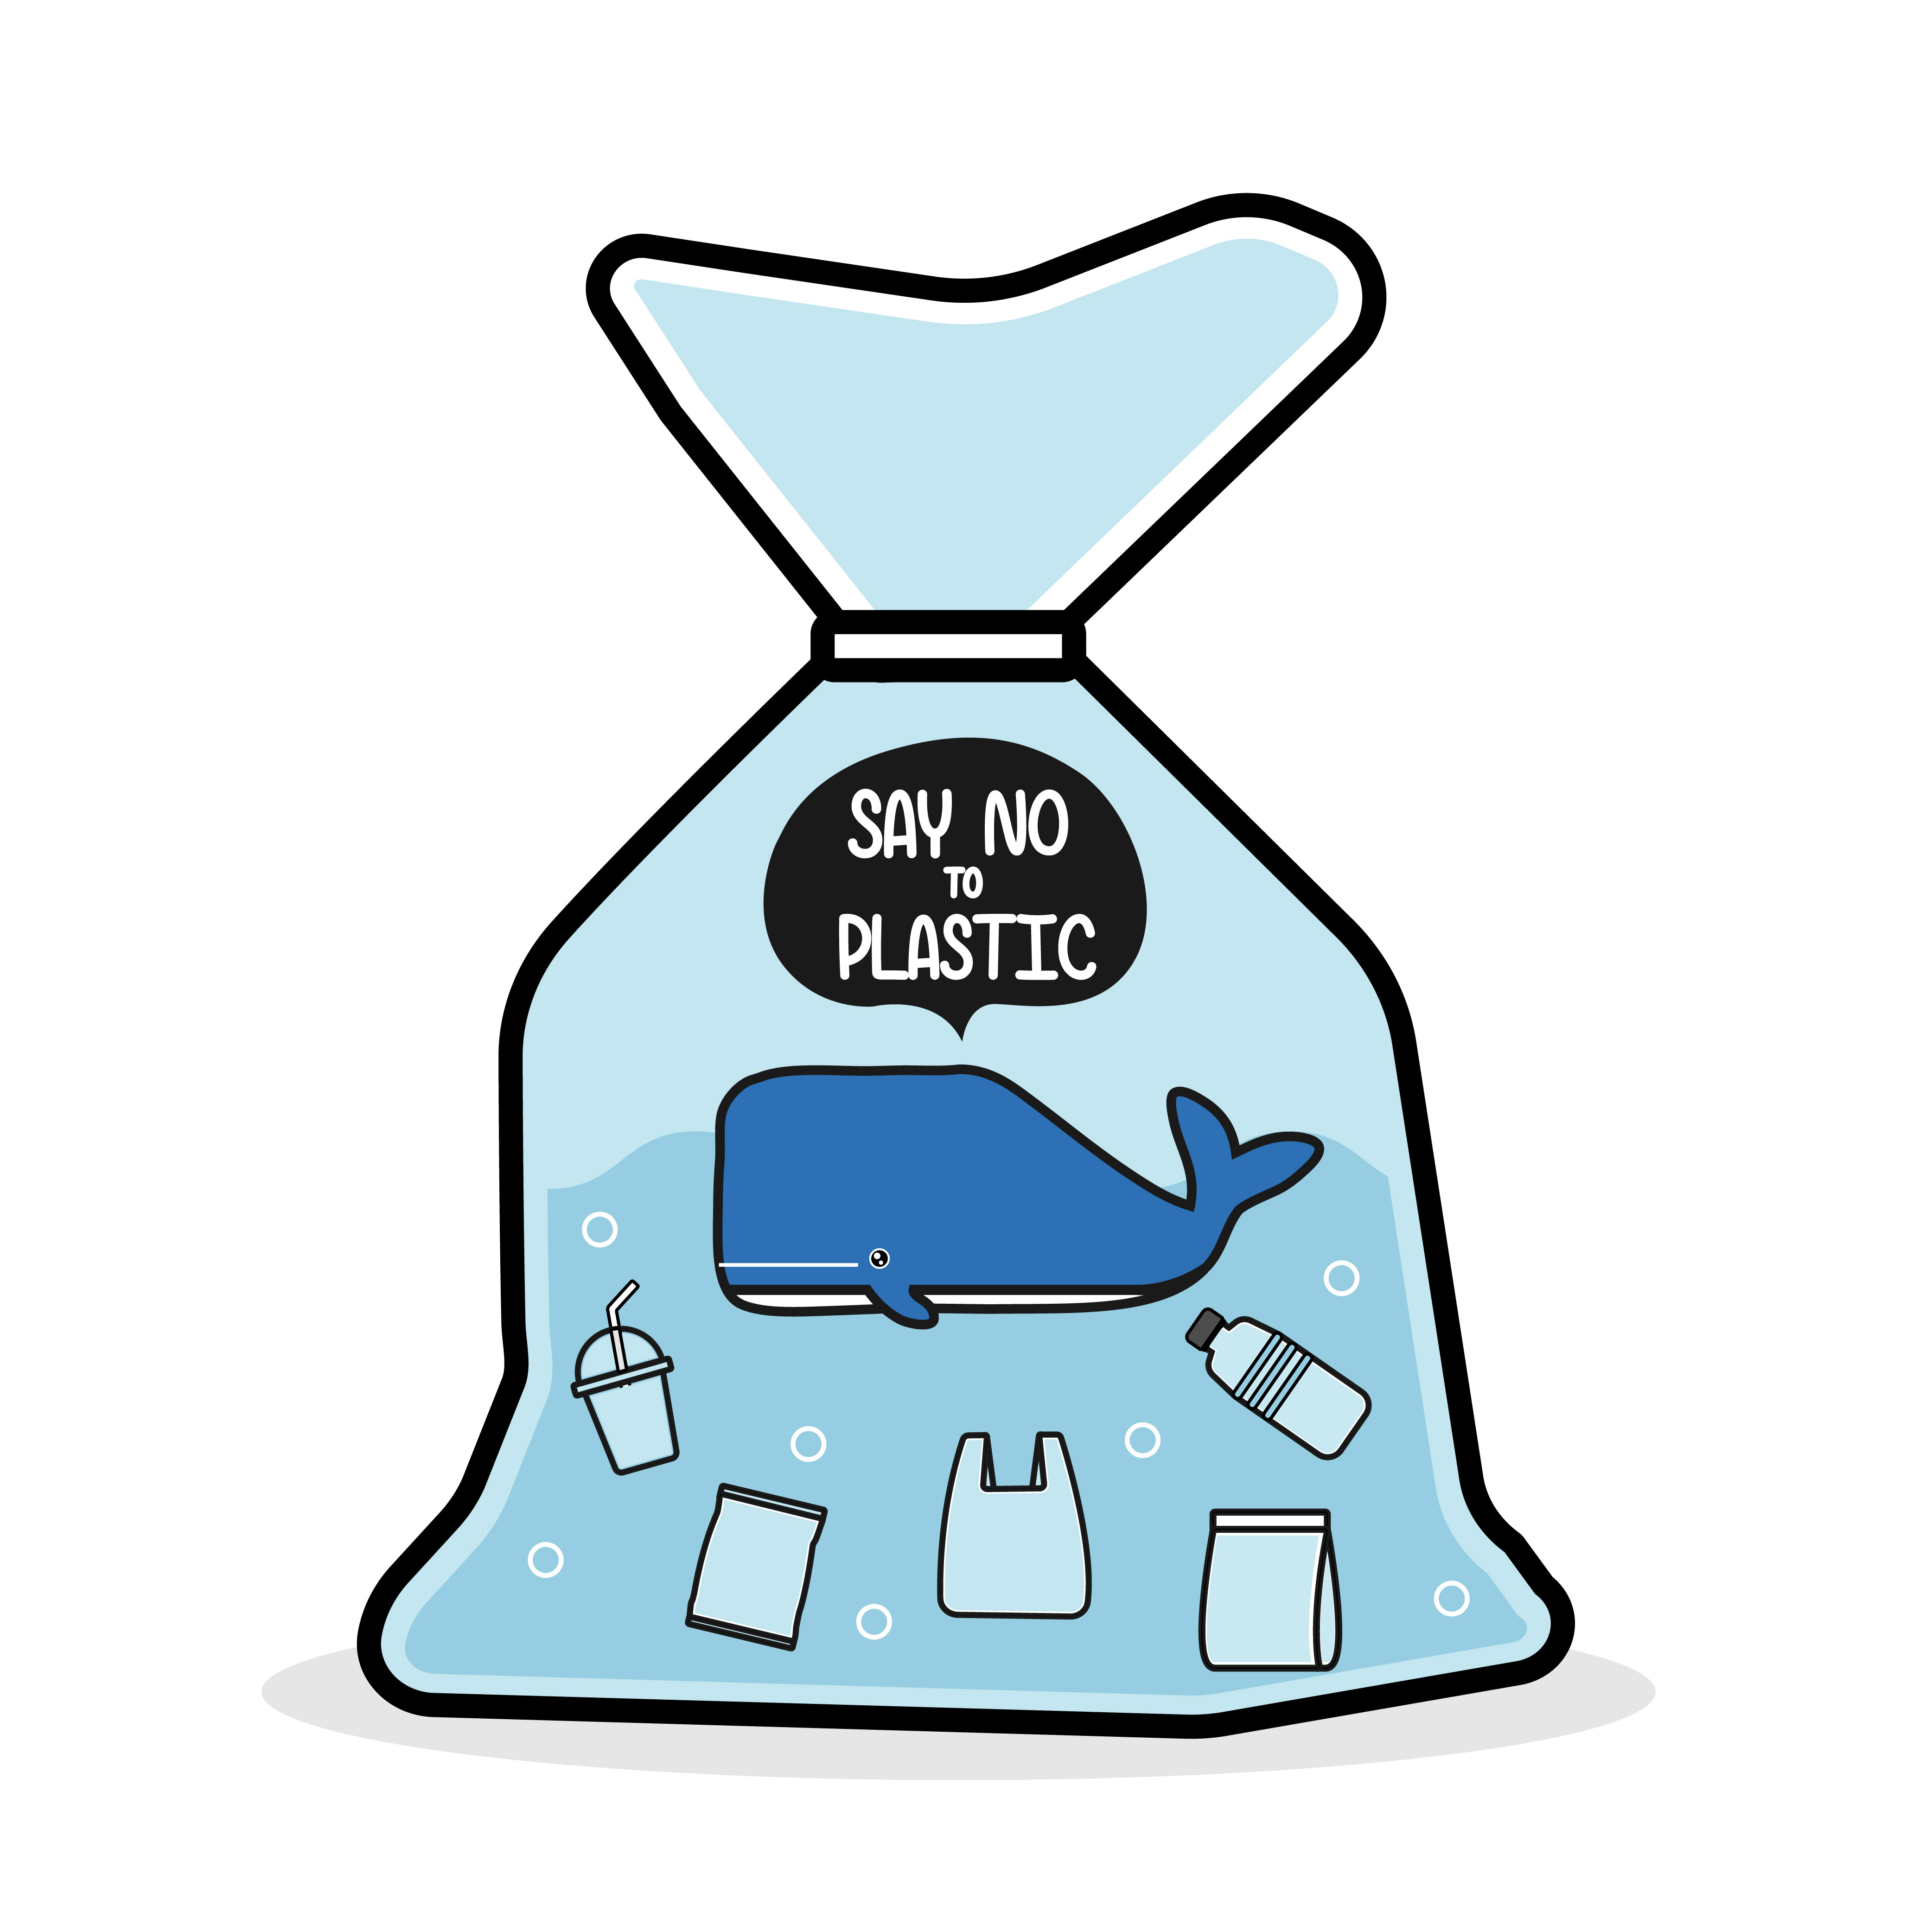 Whale in a plastic bag say no to plastic. Pollution problem concept